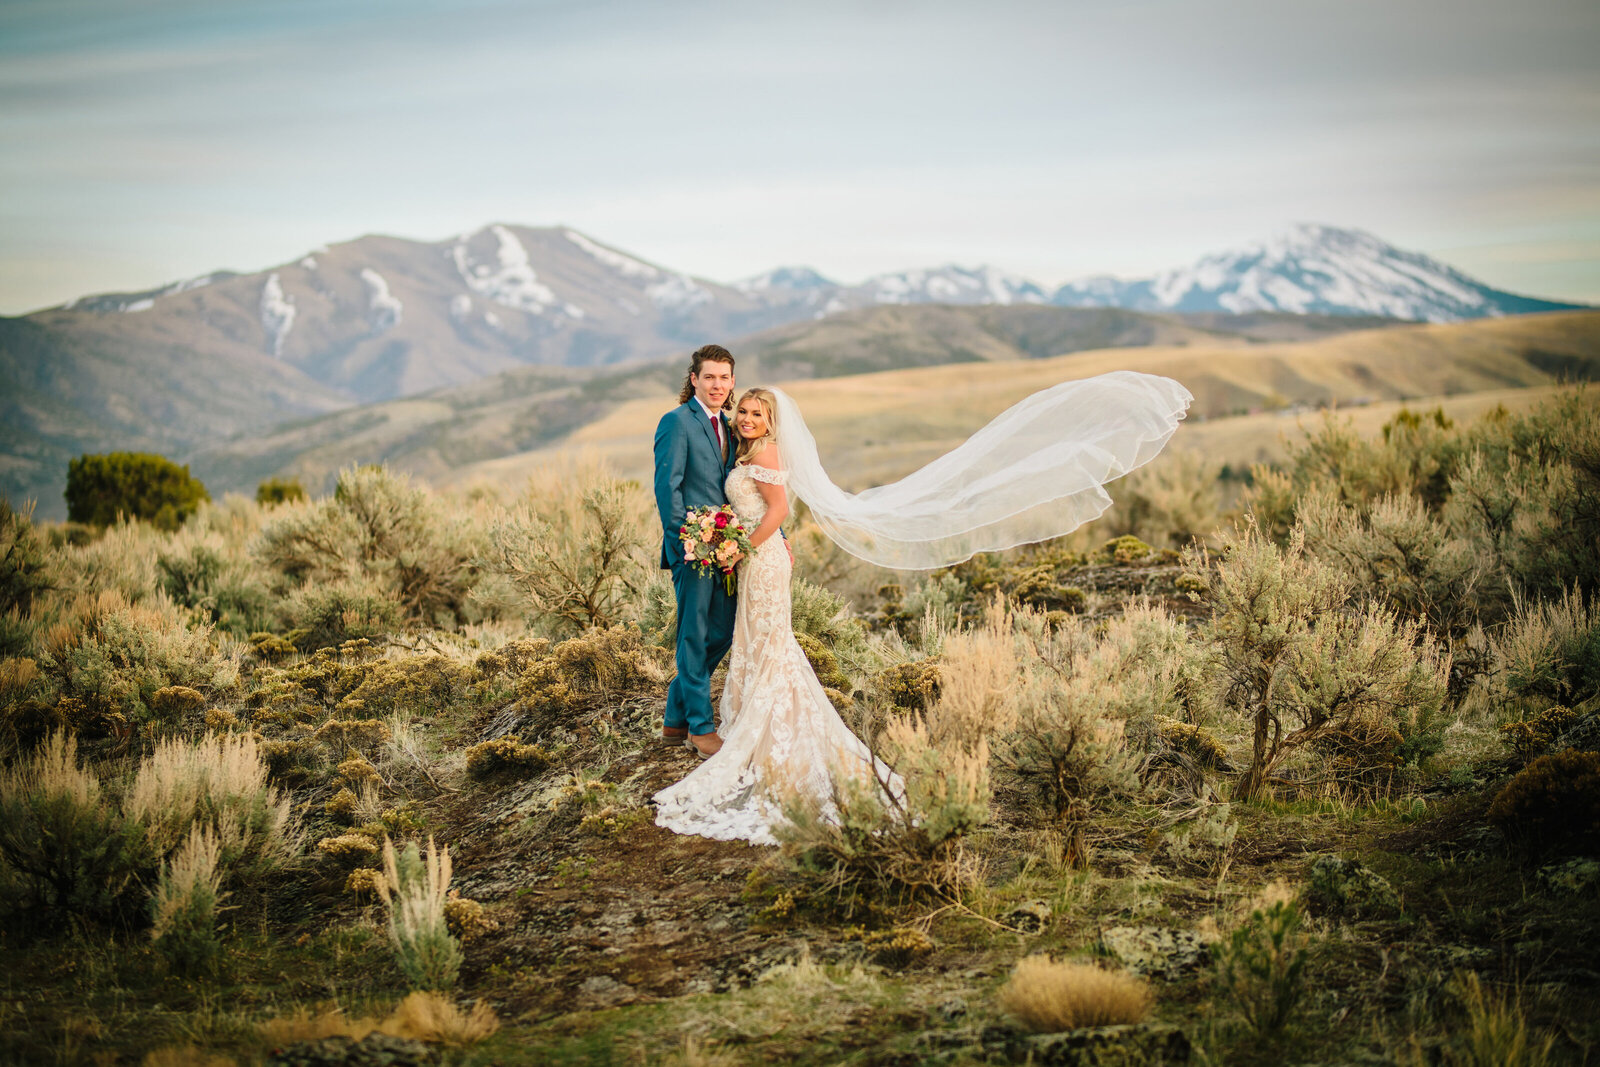 Jackson Hole photographers captures bride and groom in Grand teton National Park after outdoor elopement